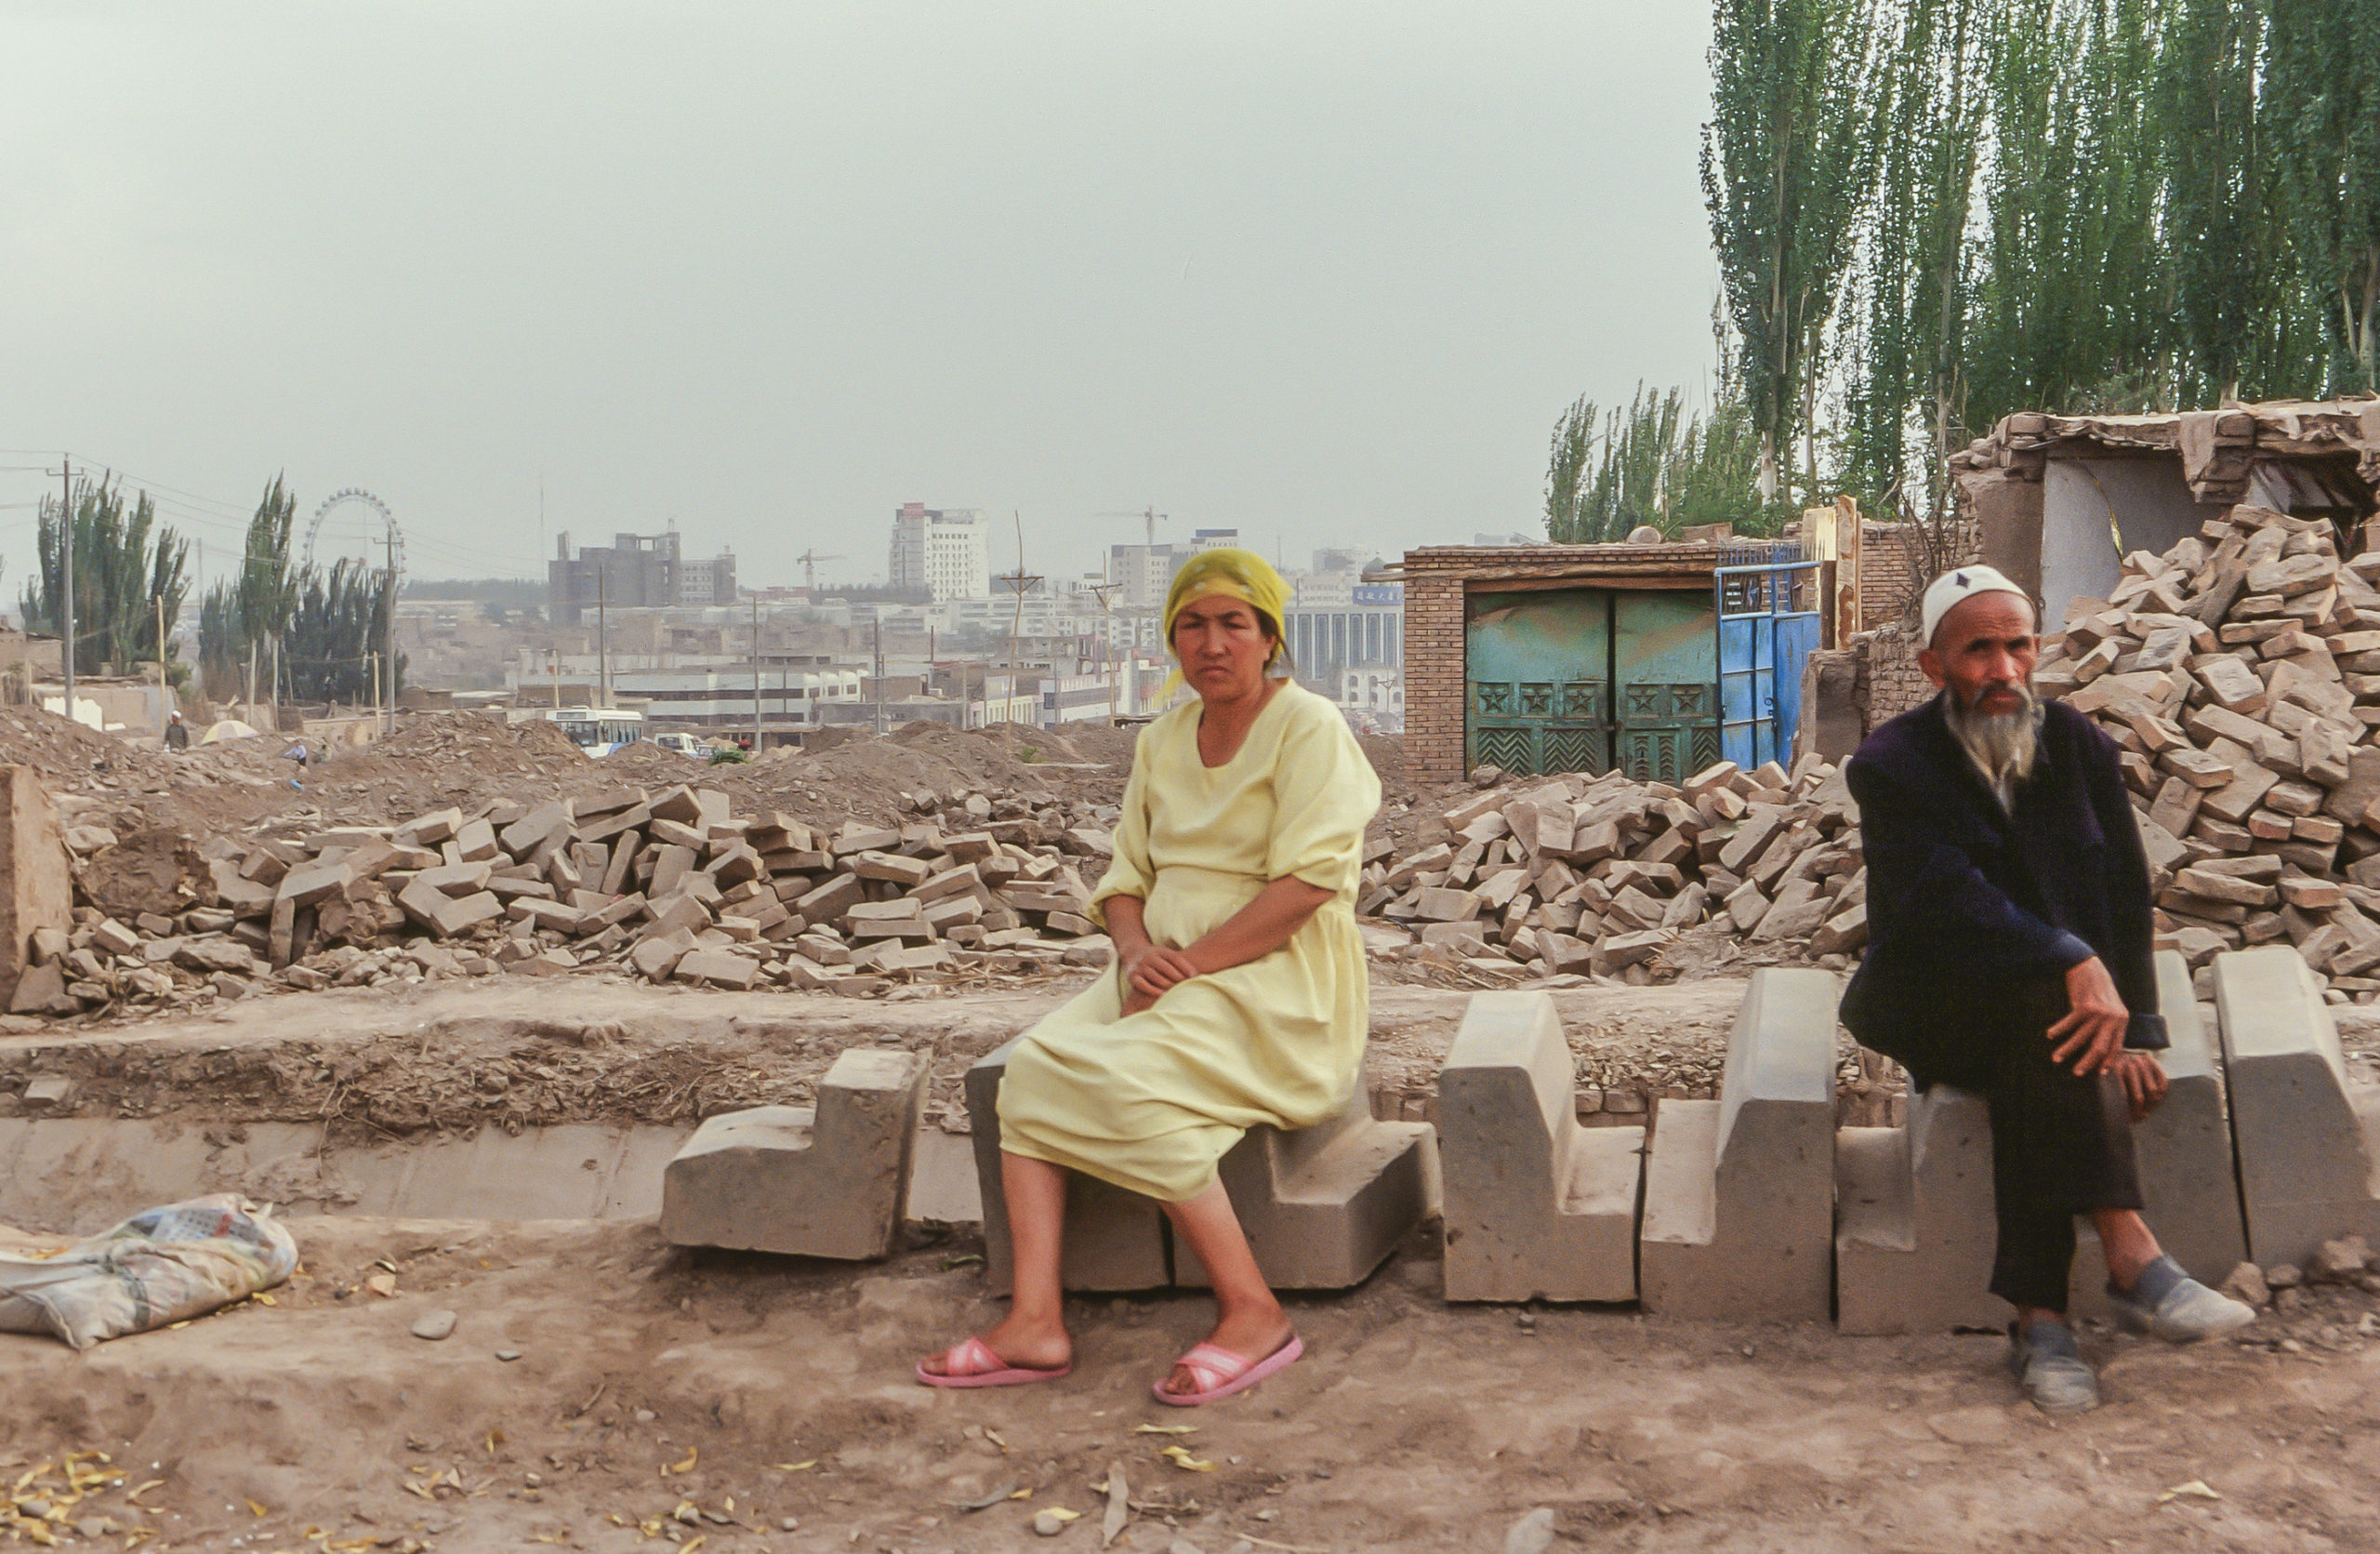 Kashgar image project, extended selection-58